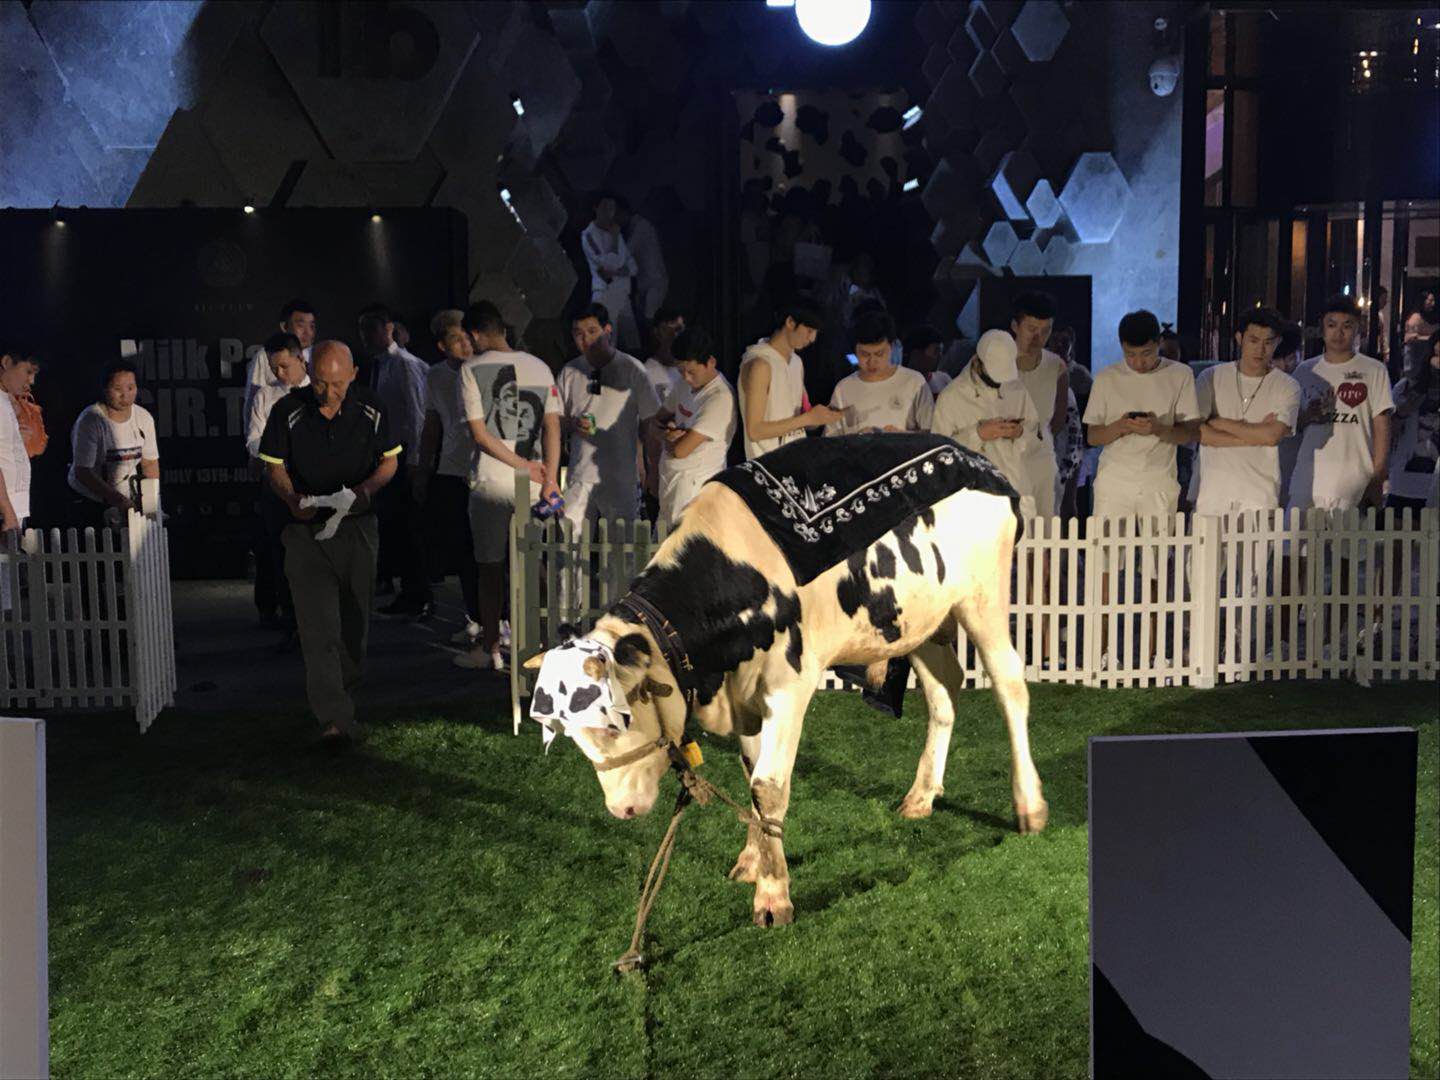 Beicology: Club Sir Teen’s Controversial Cow Display